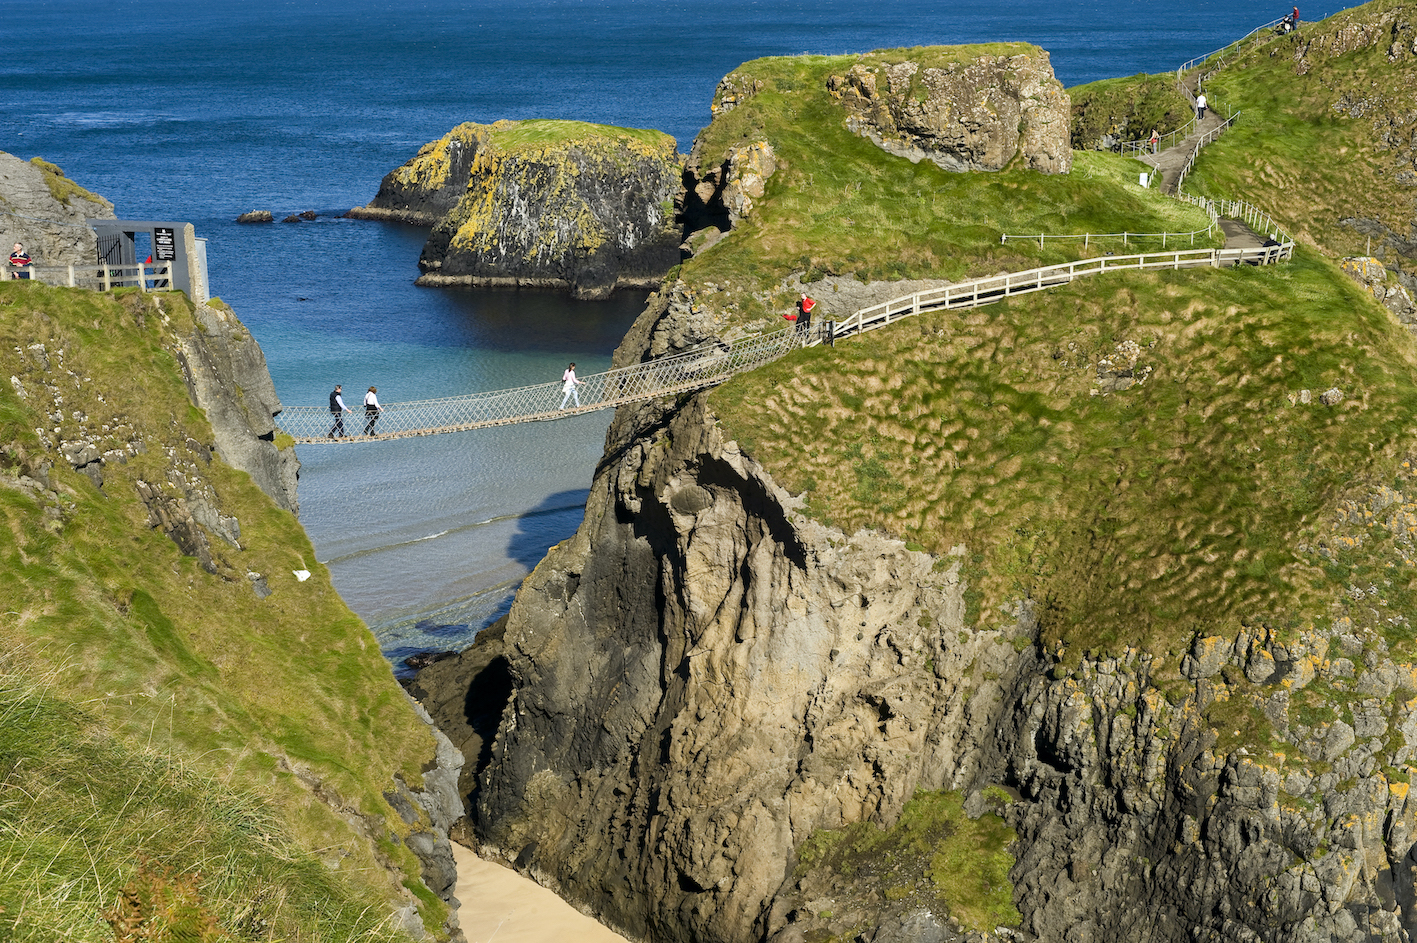 Carrick-a-Rede reopens - Celtic Canada